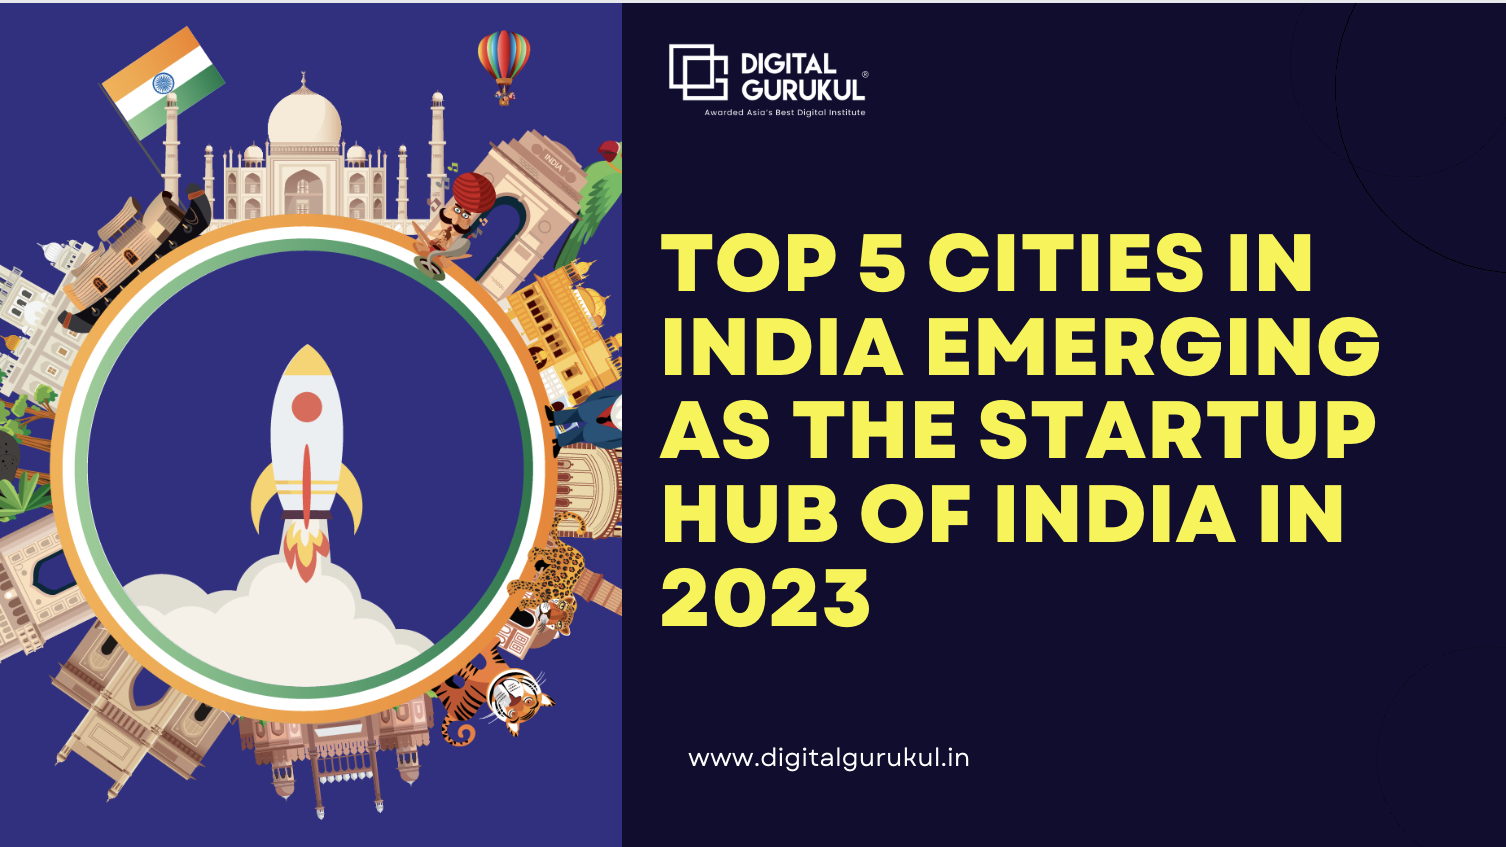 Top 5 cities in India emerging as the startup hub of India in 2023